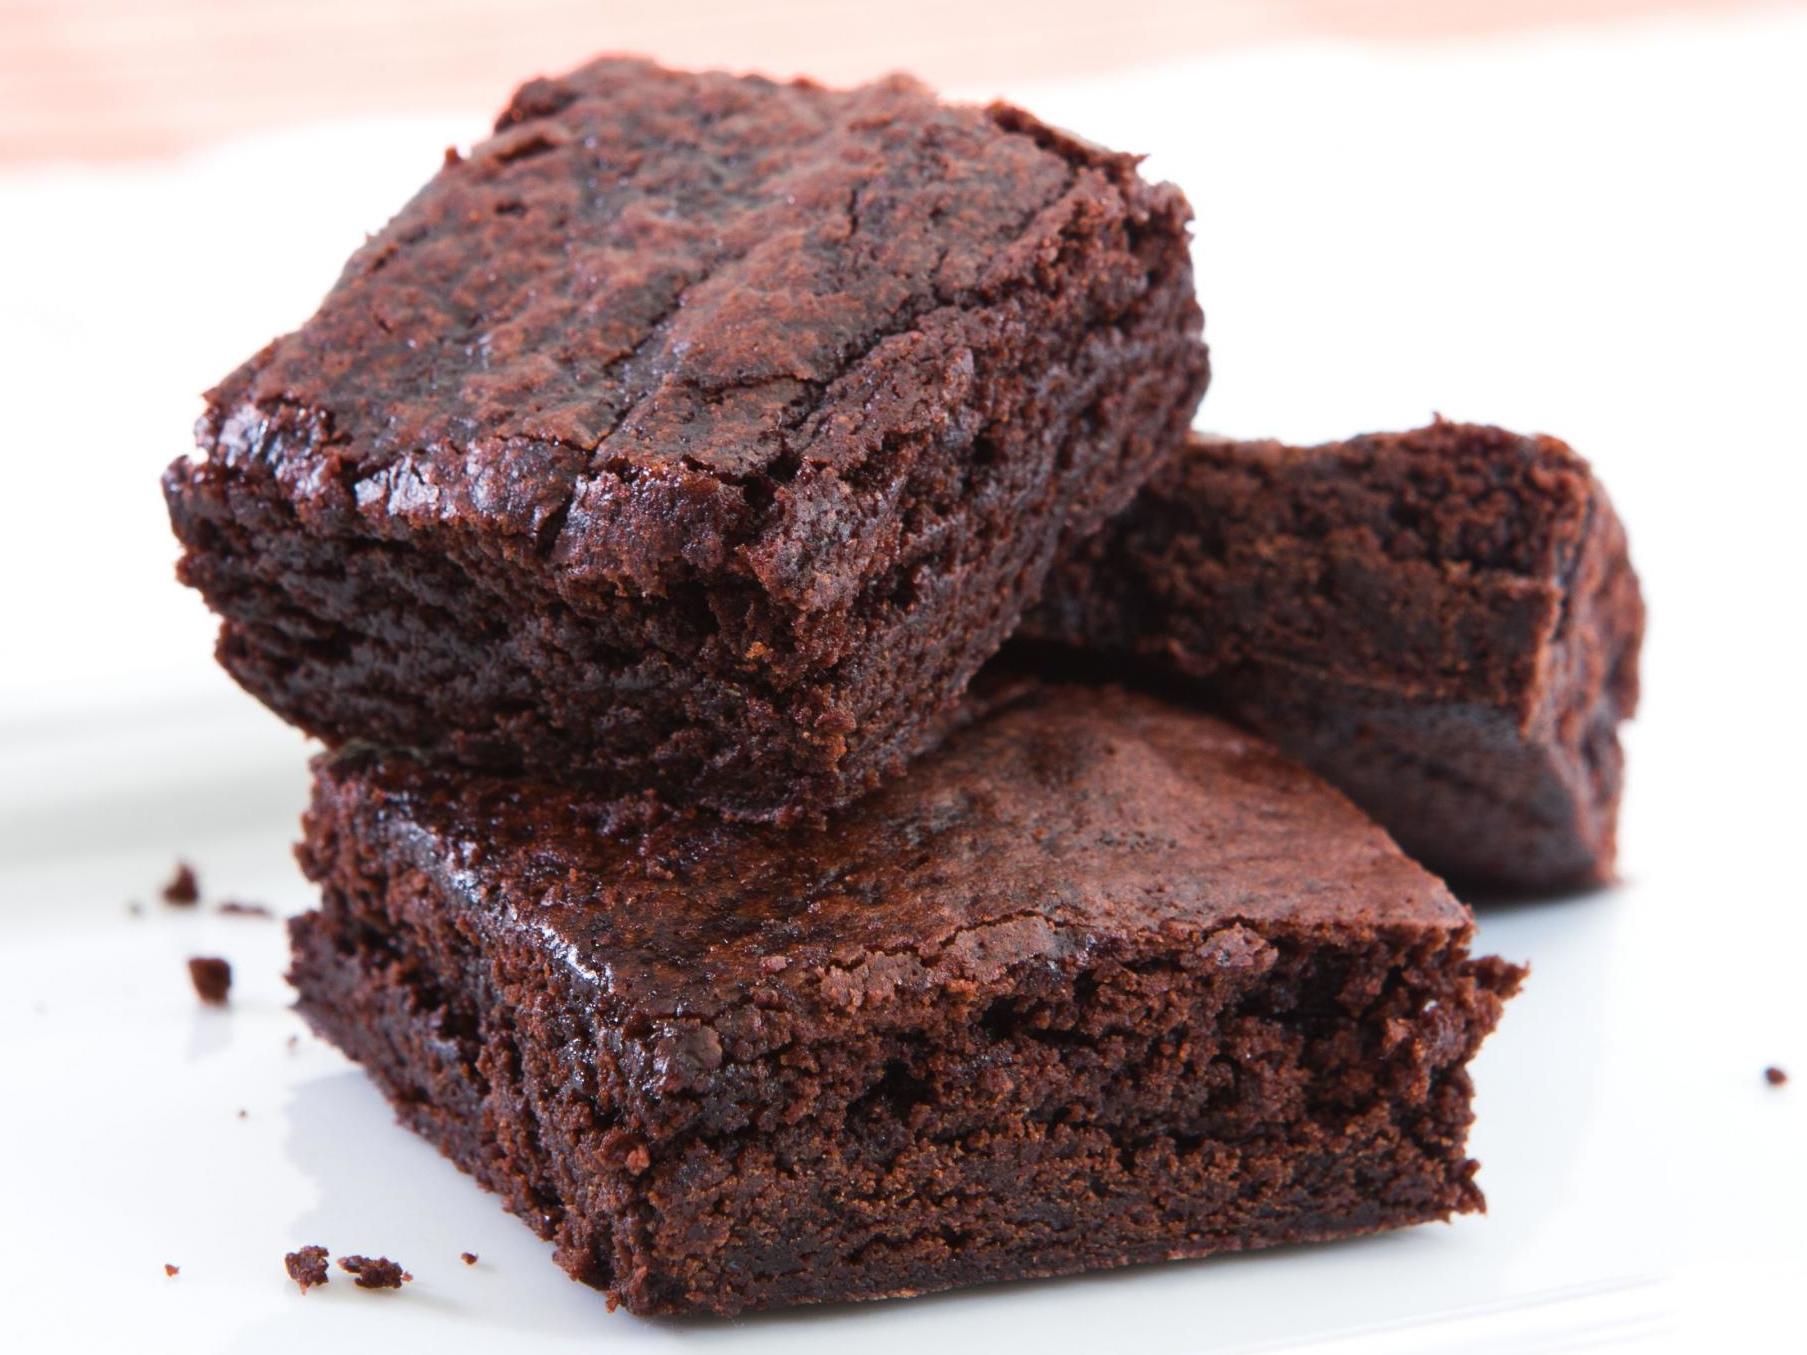 The staff member put laxatives in chocolate brownies she baked.